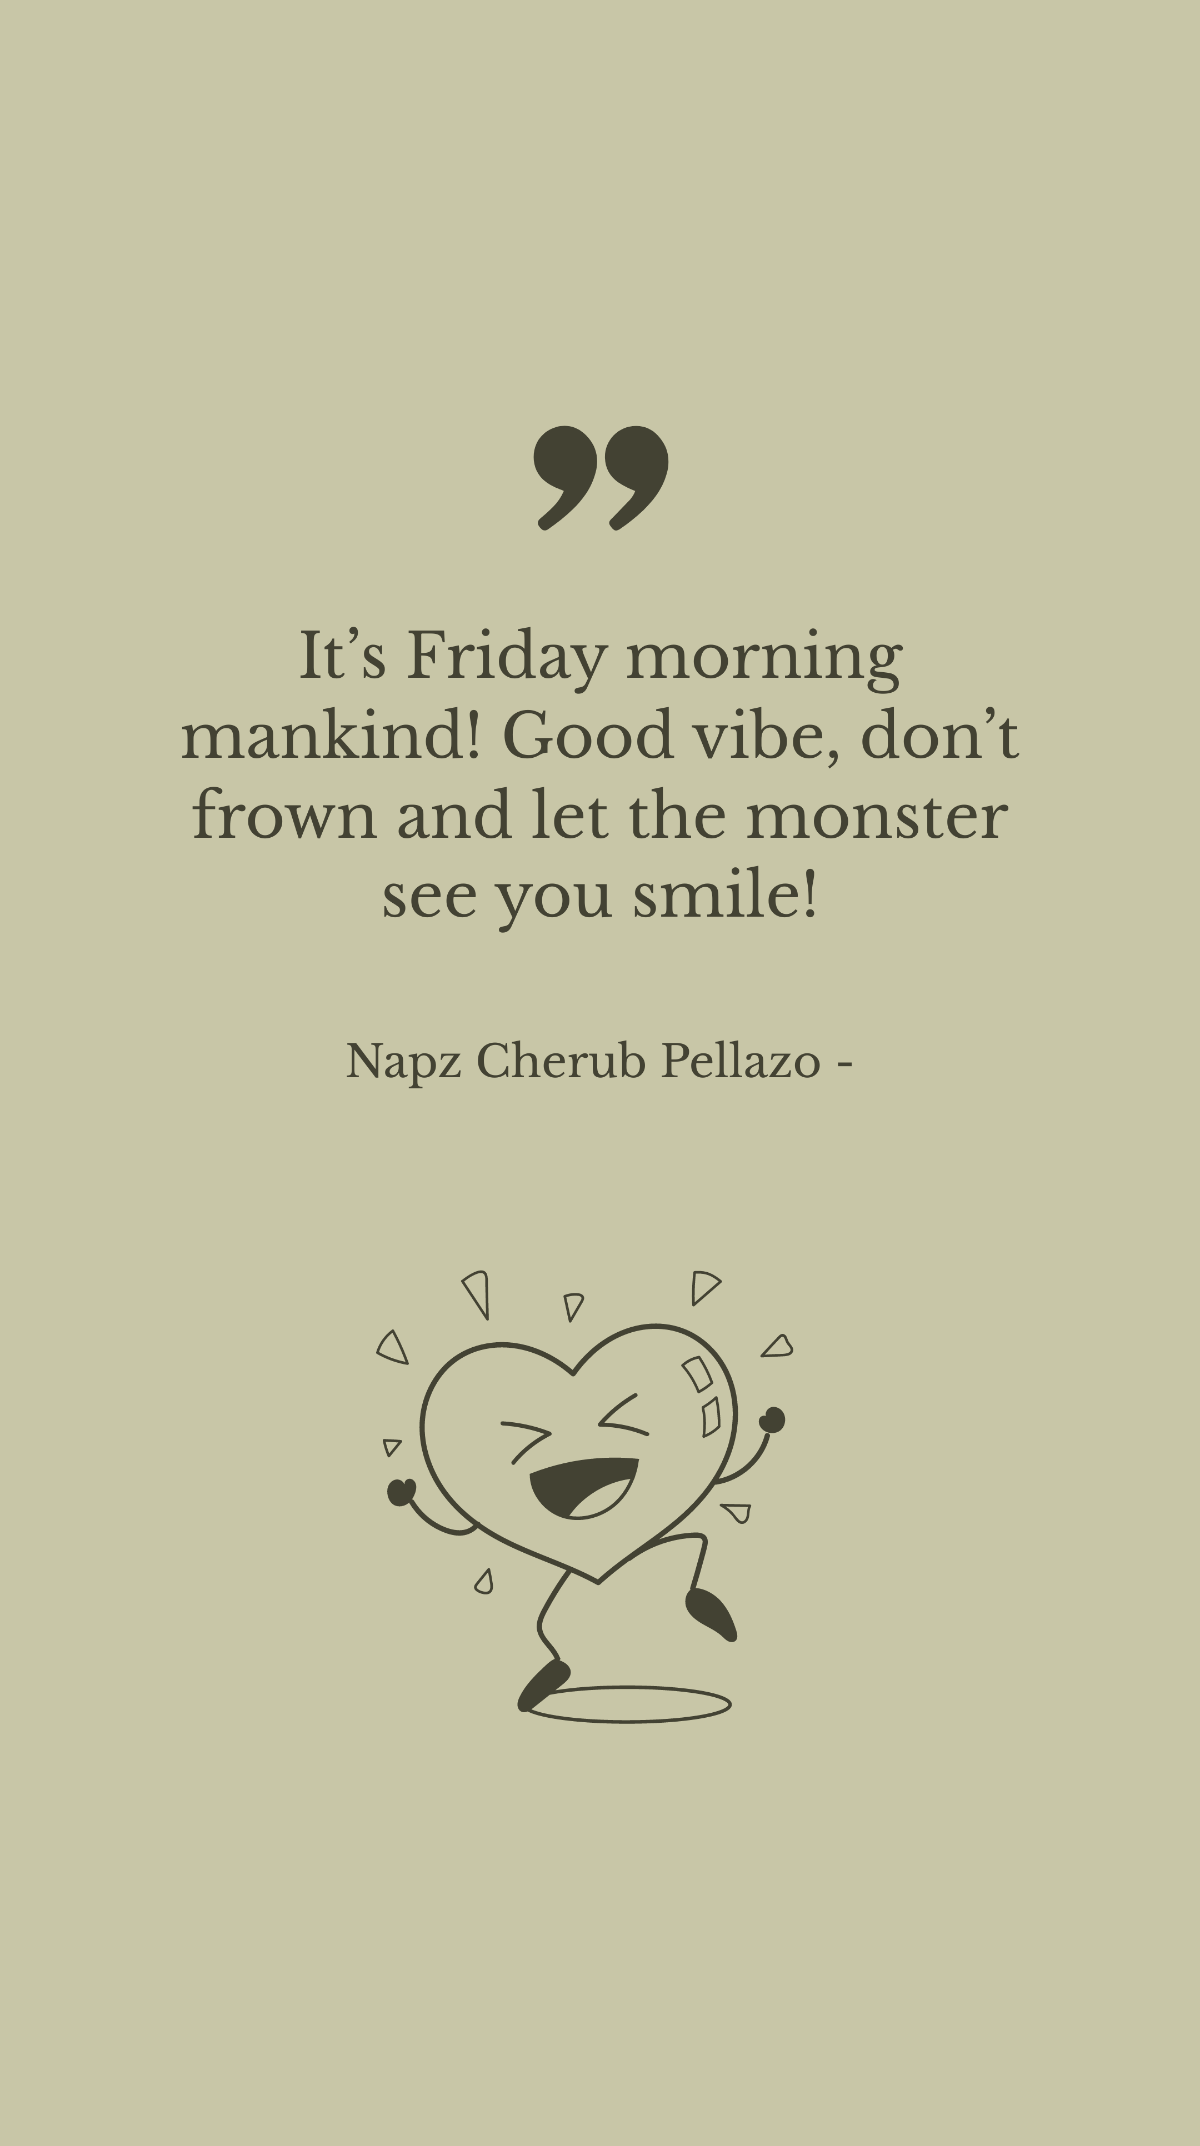 Napz Cherub Pellazo - It’s Friday morning mankind! Good vibe, don’t frown and let the monster see you smile!